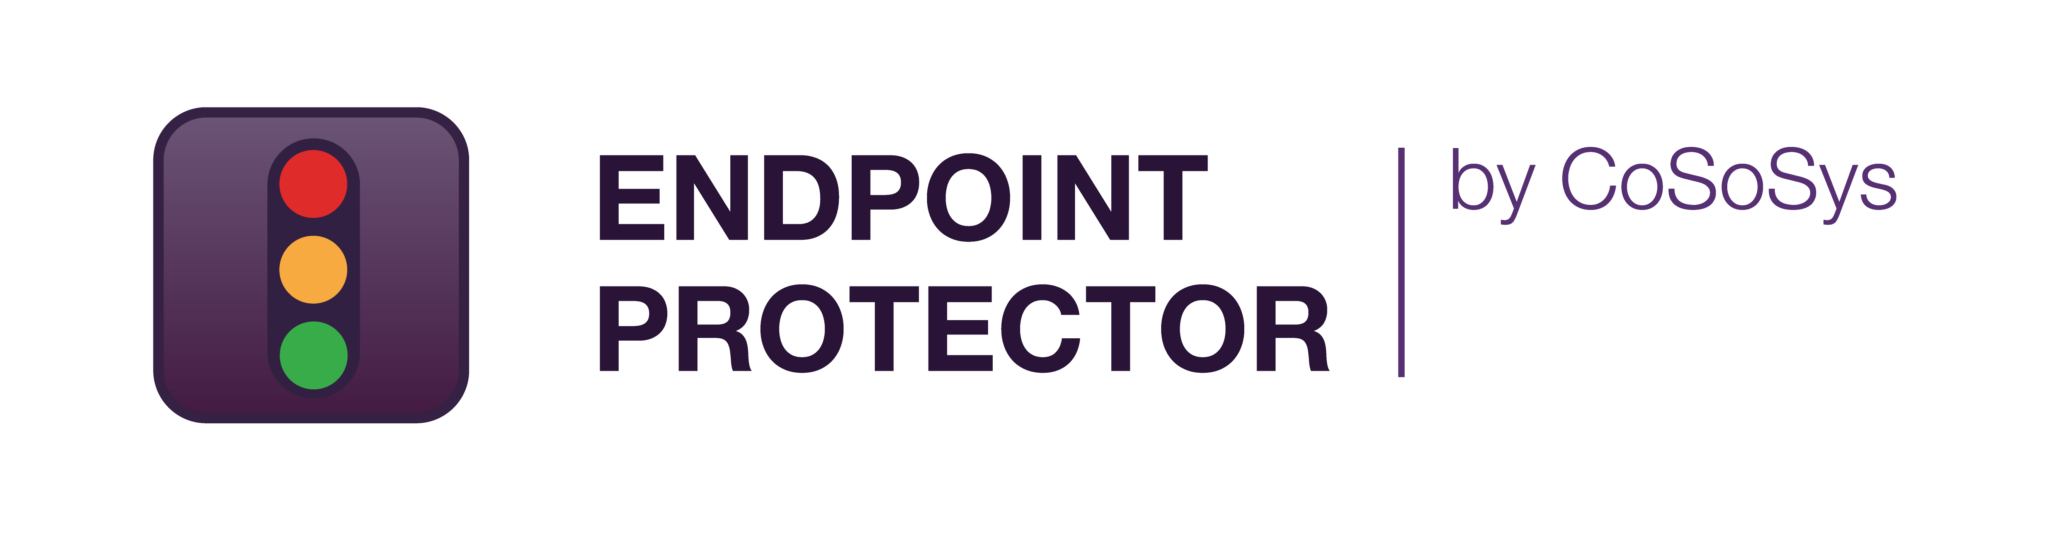 Endpoint protector by cososys